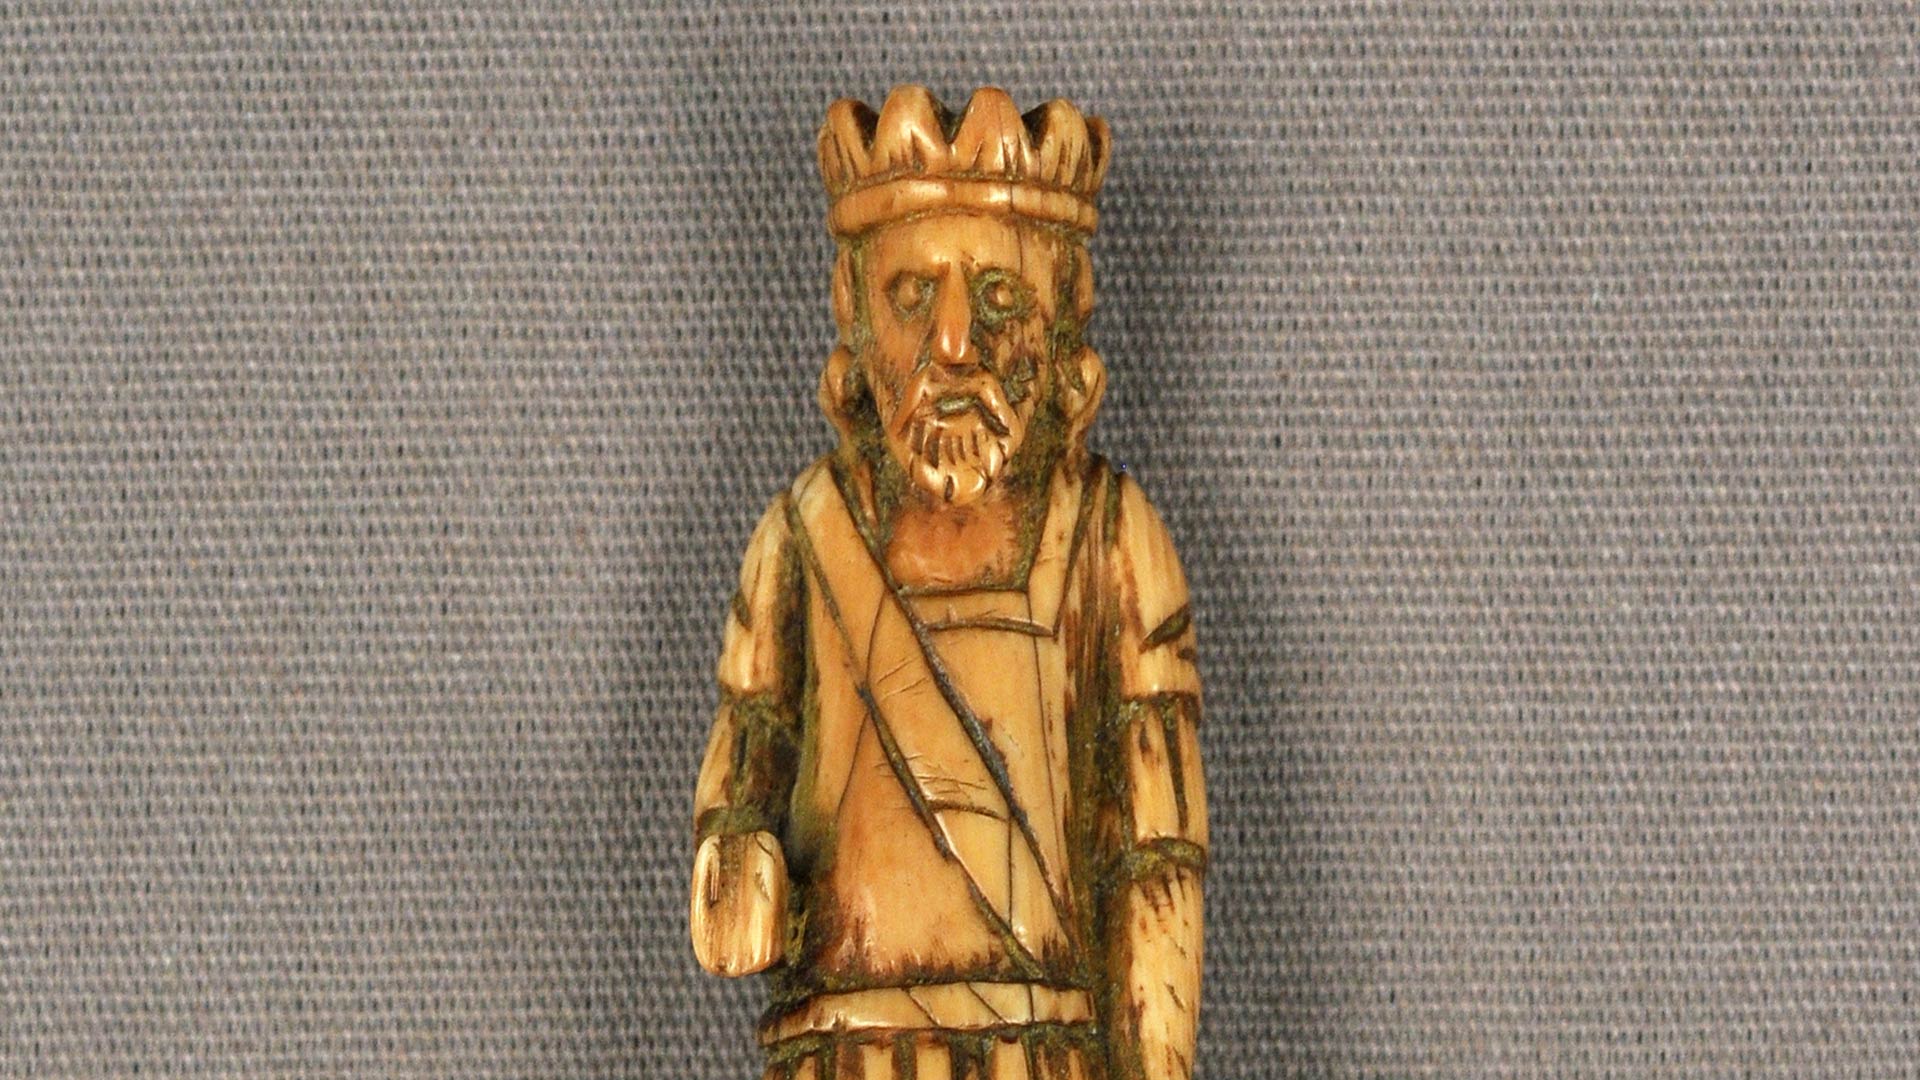 photo of a small, wooden king statue